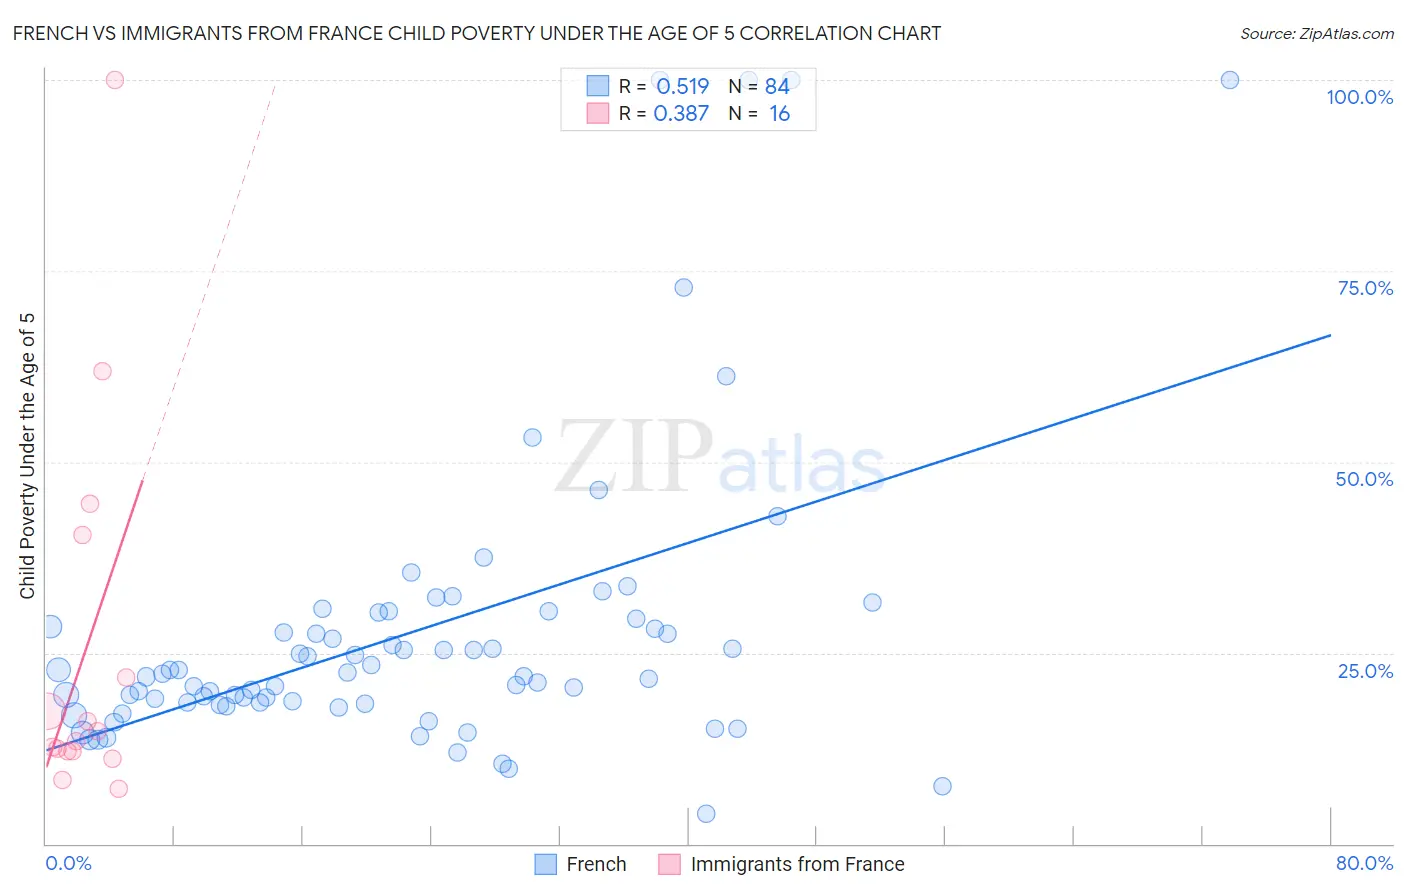 French vs Immigrants from France Child Poverty Under the Age of 5